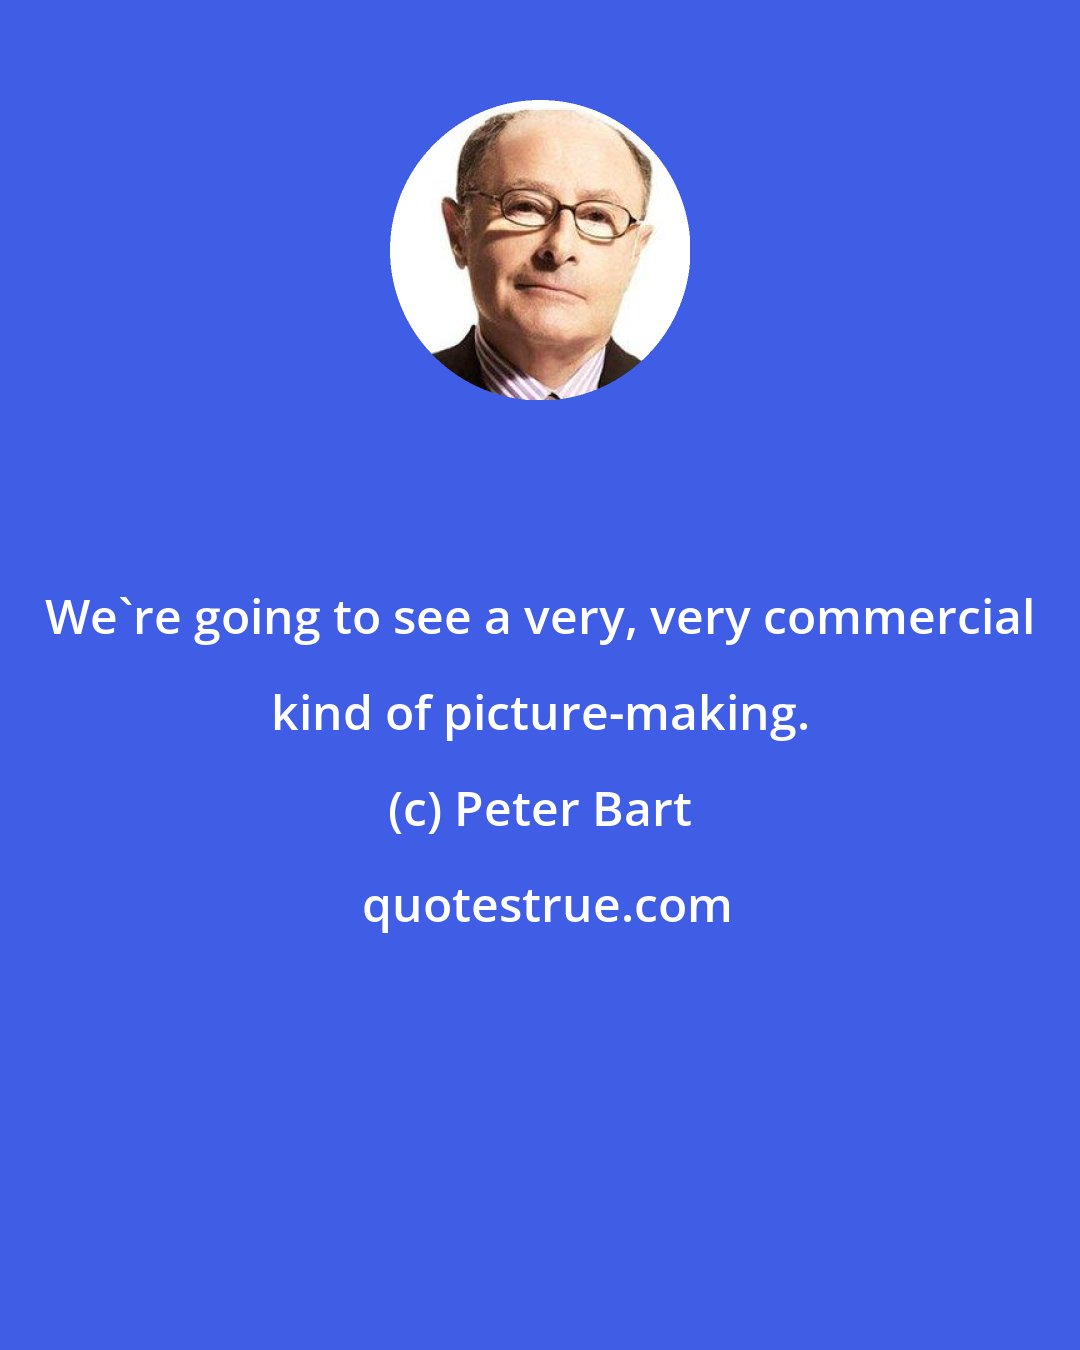 Peter Bart: We're going to see a very, very commercial kind of picture-making.